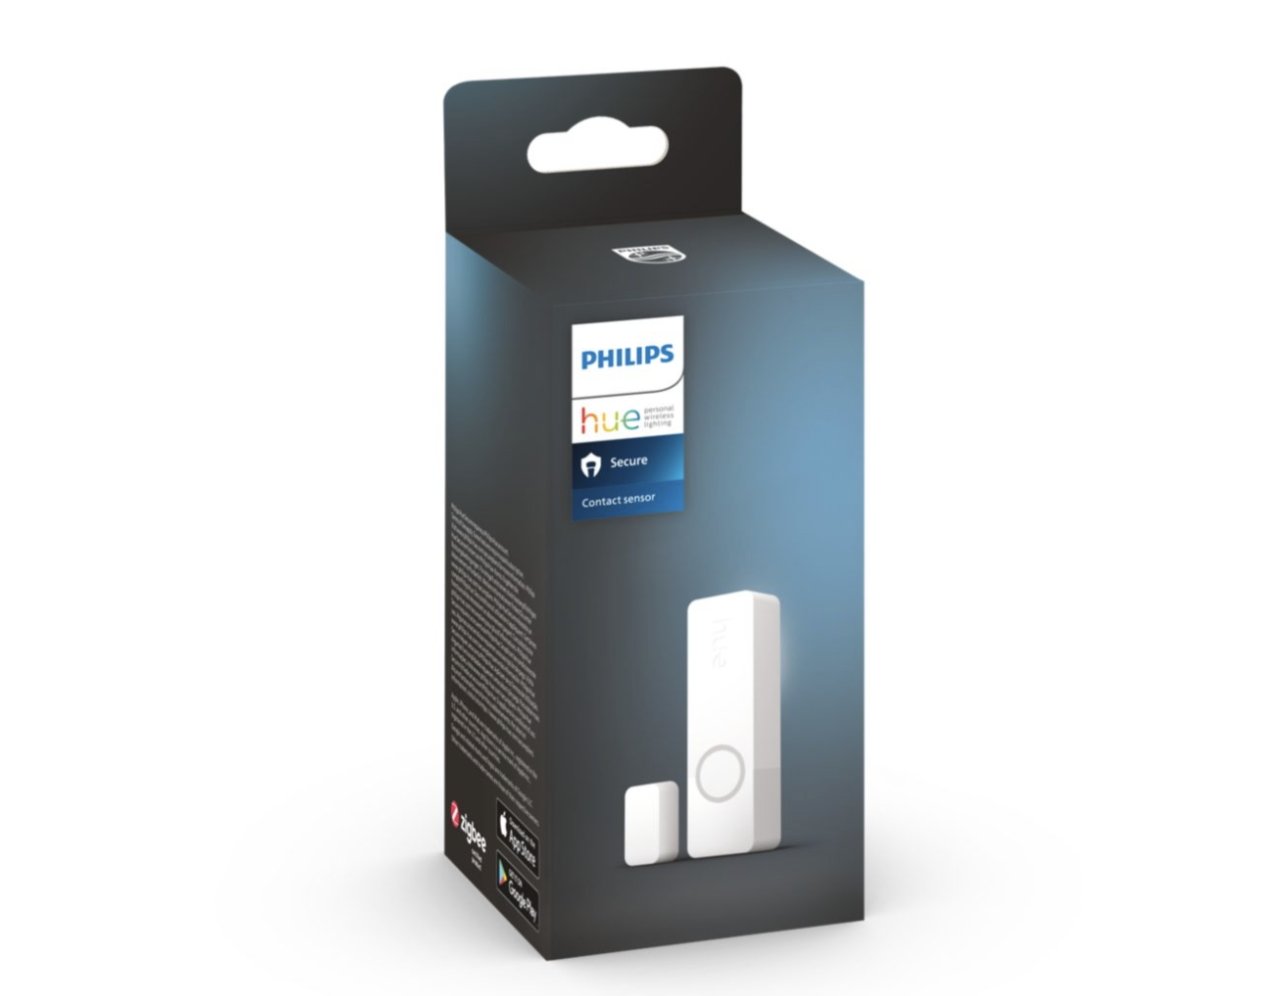 The new contact sensor in Hue's familiar packaging design